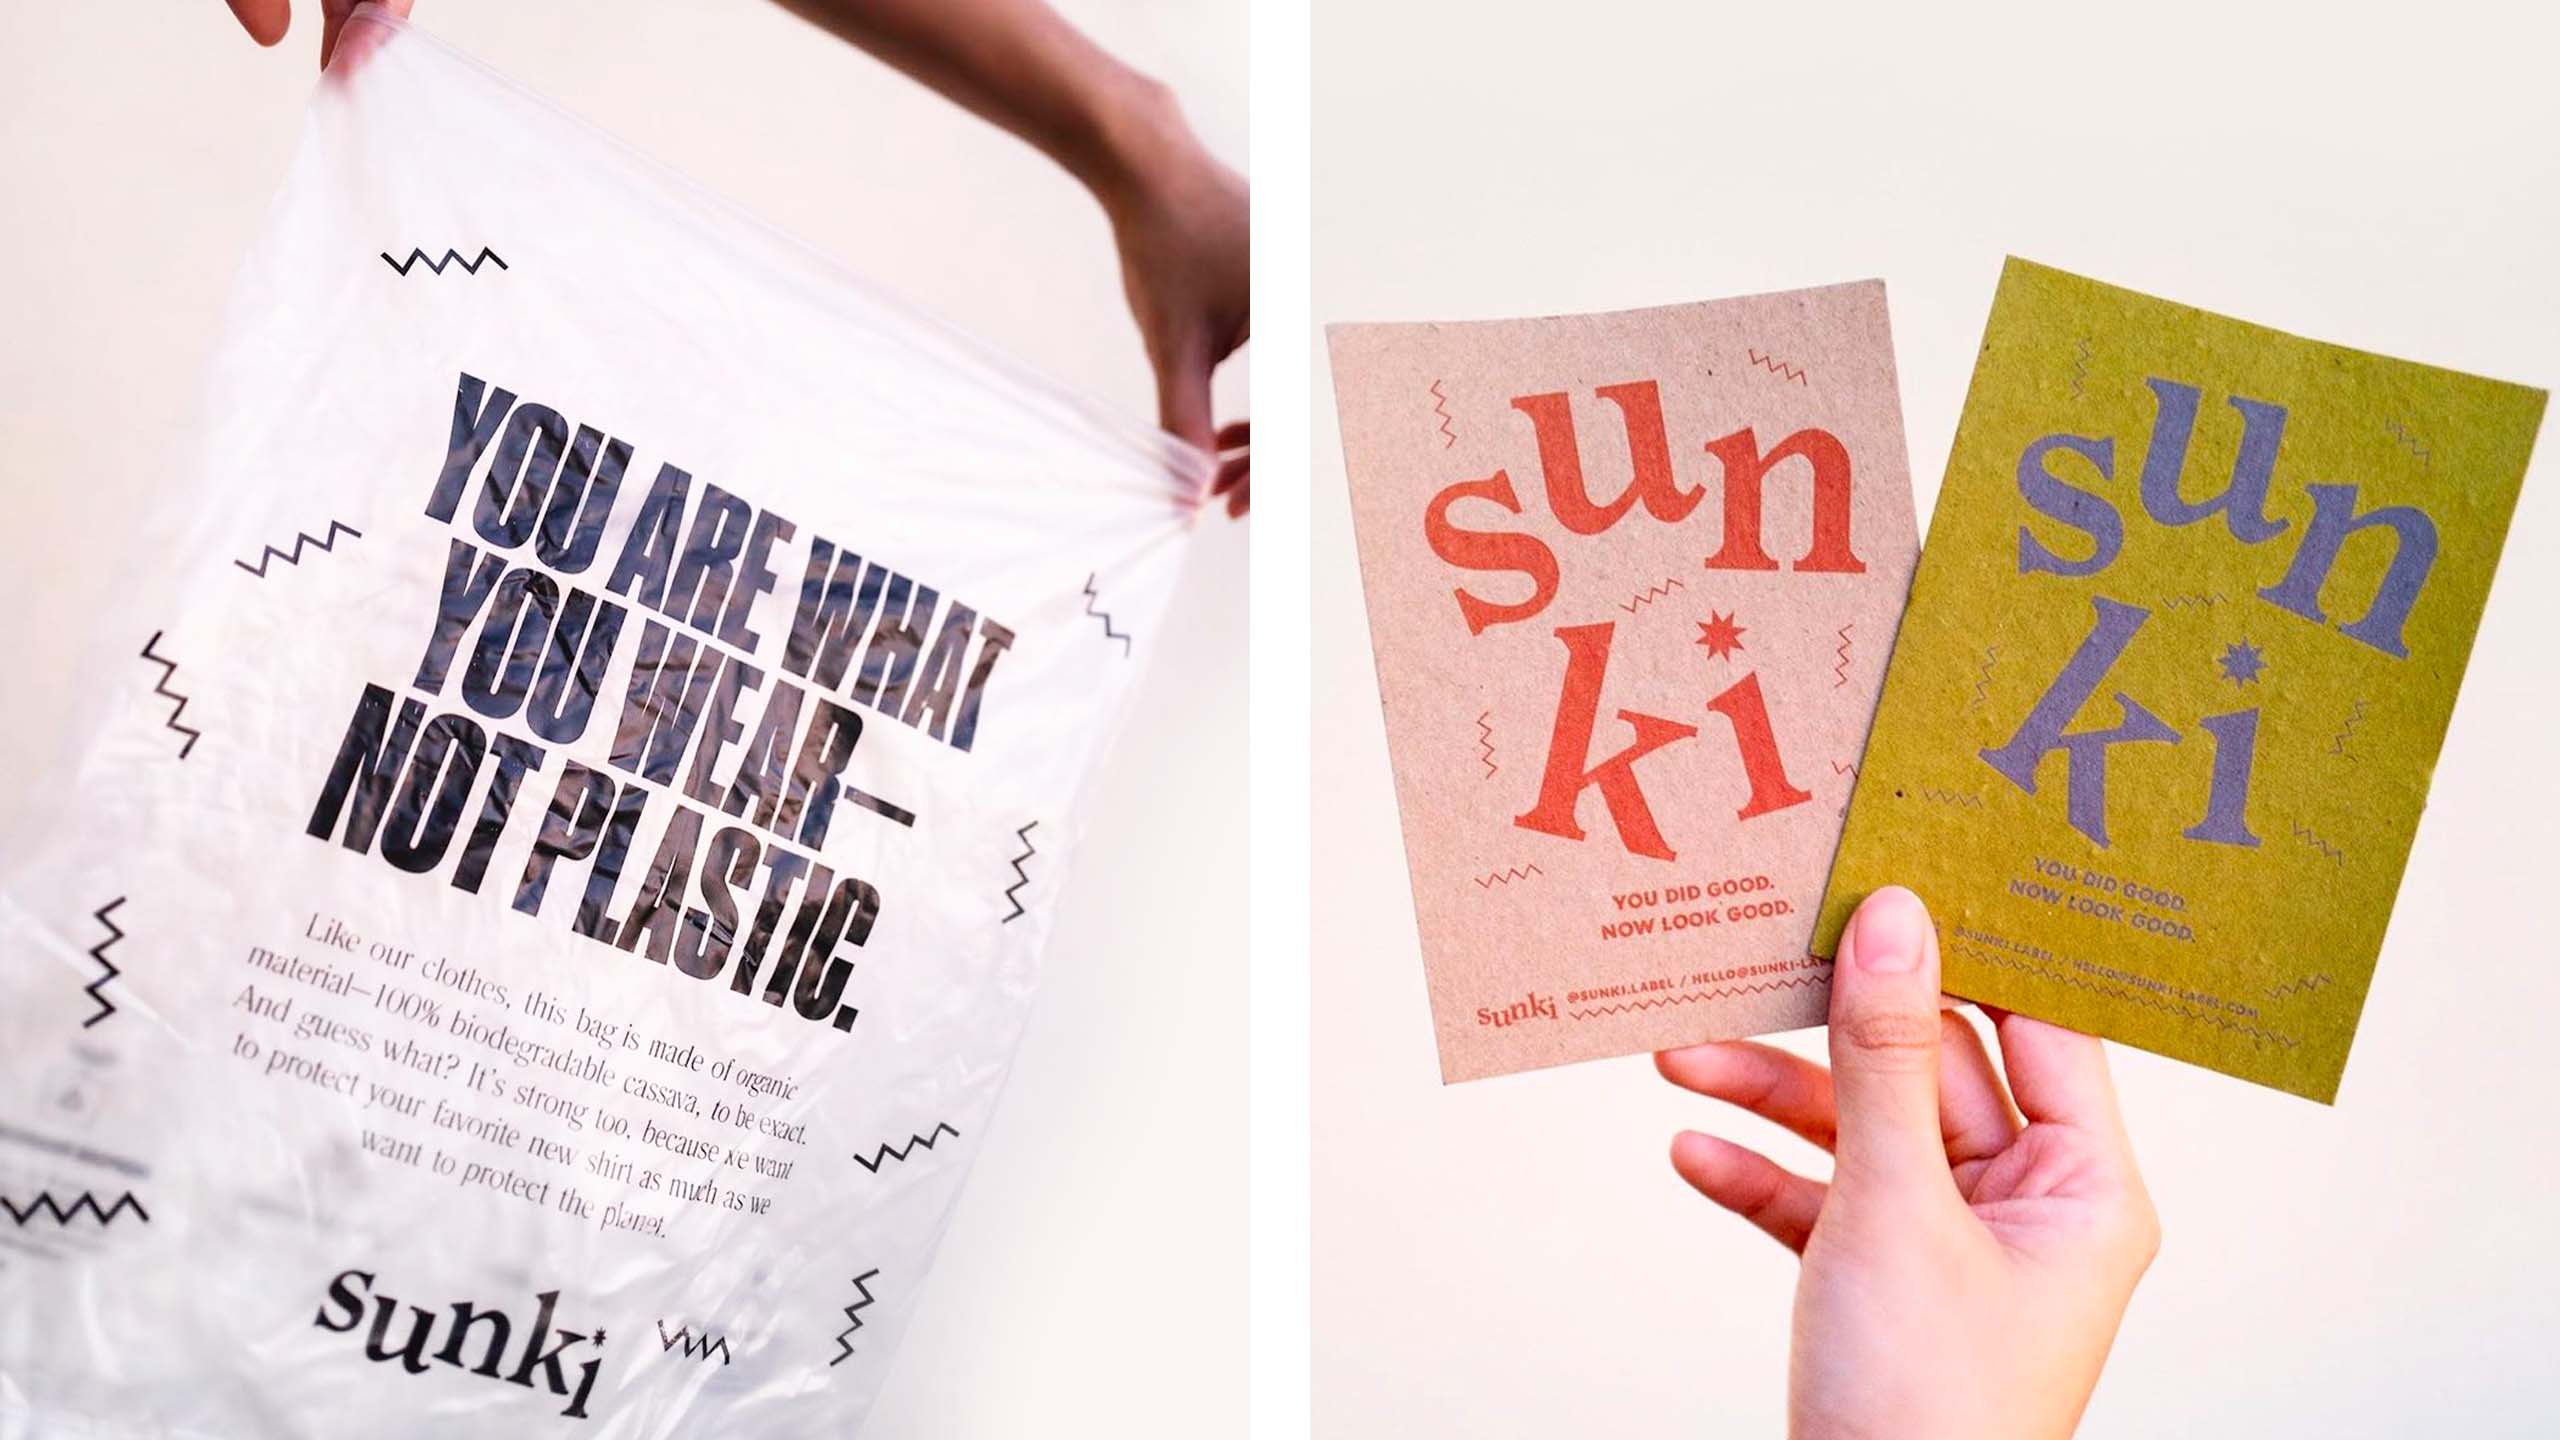 Sustainable packaging and product tags designed for sustainable retail brand Sunki